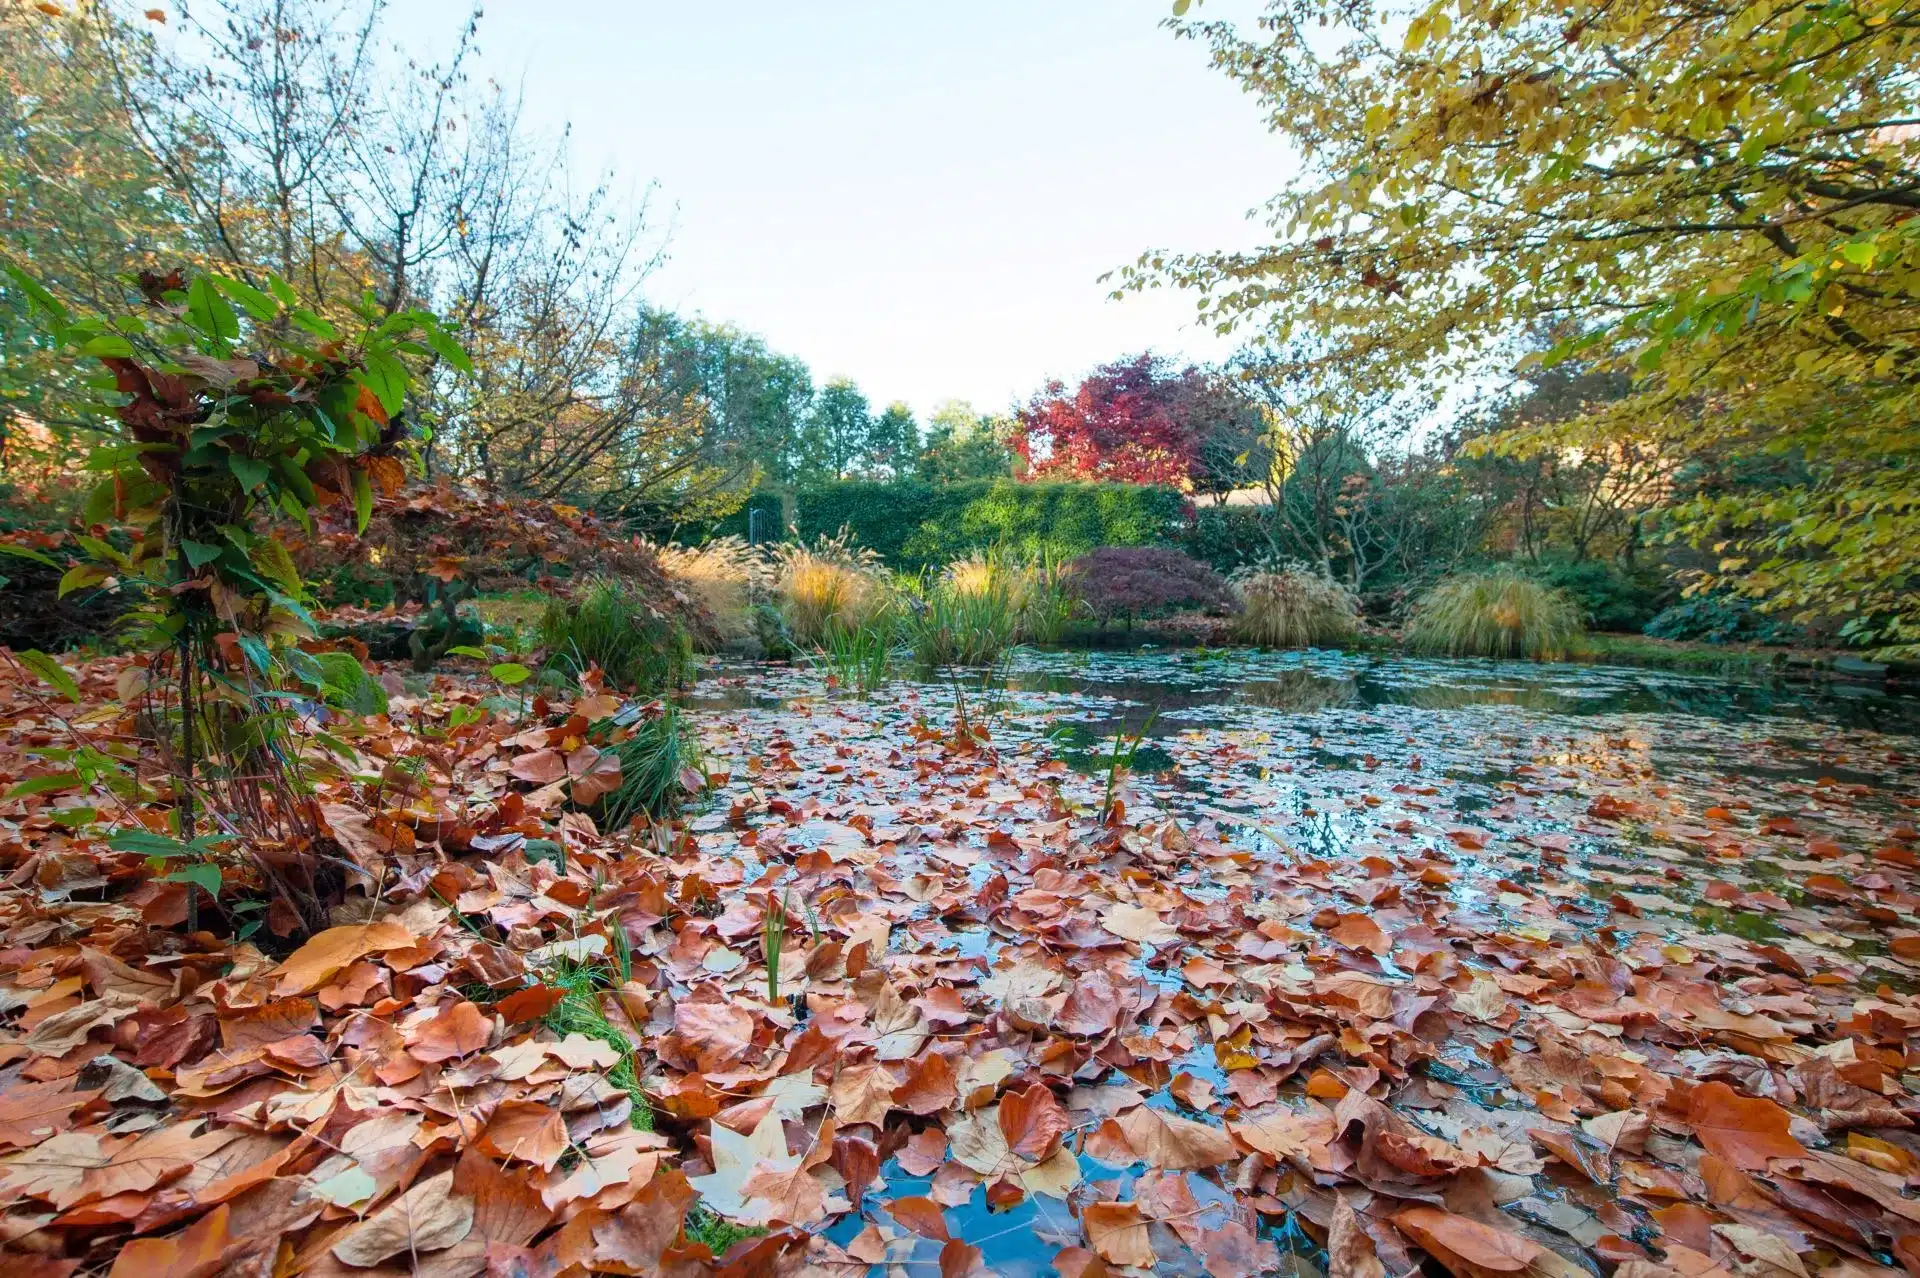 Get your Pond Ready for Fall